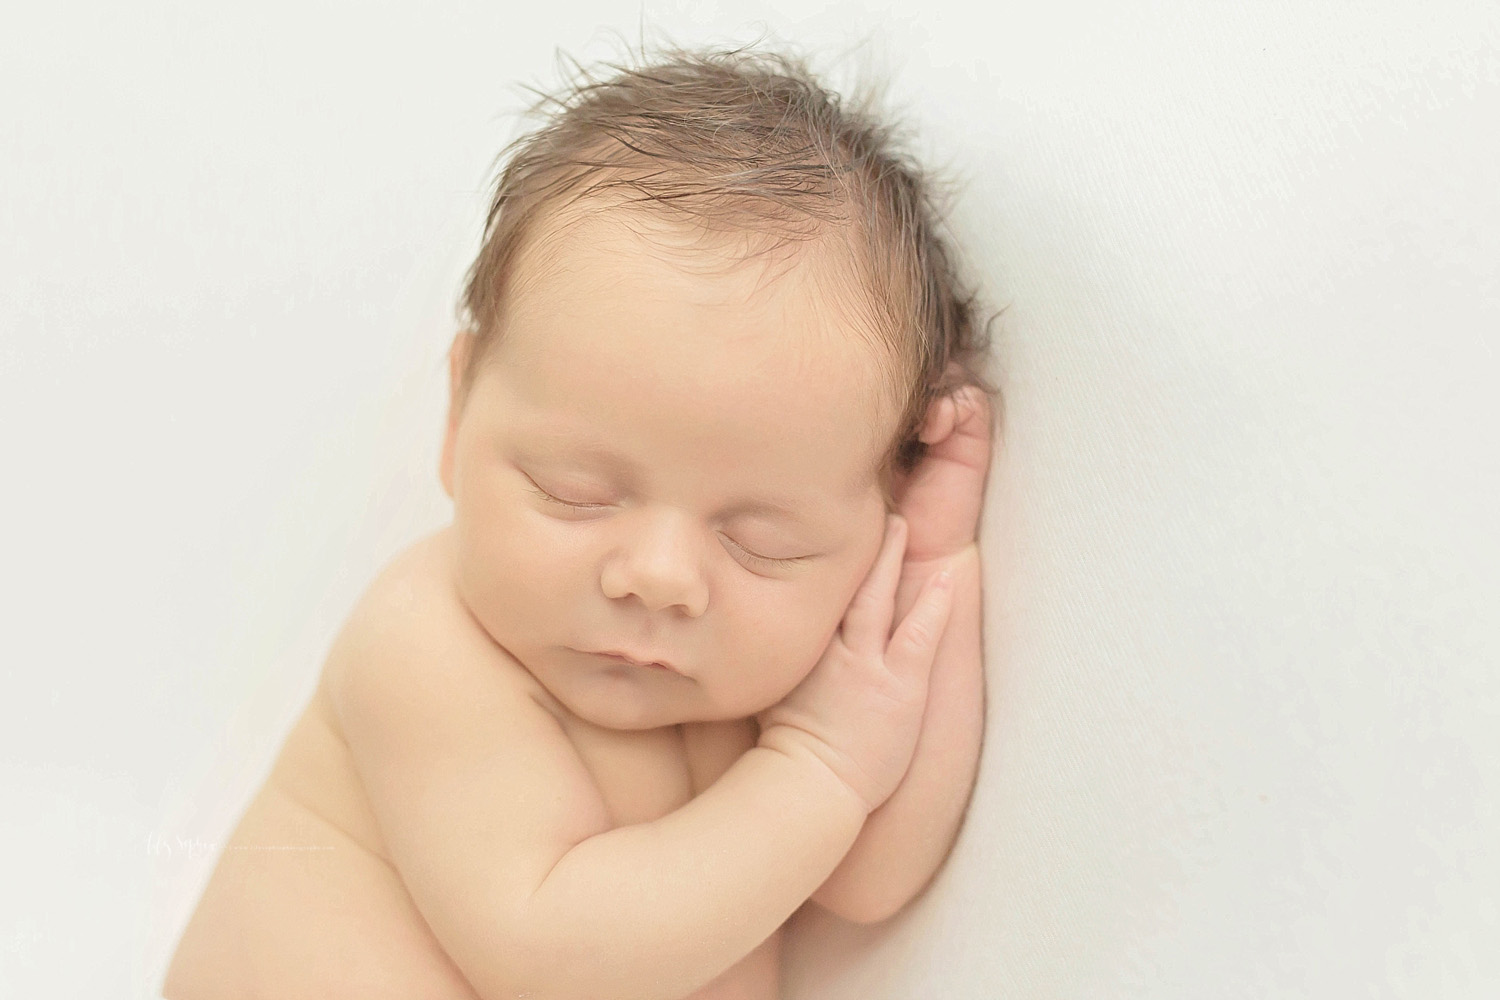  Image of a newborn, baby, boy with his hands under his head, sleeping on his side.&nbsp; 